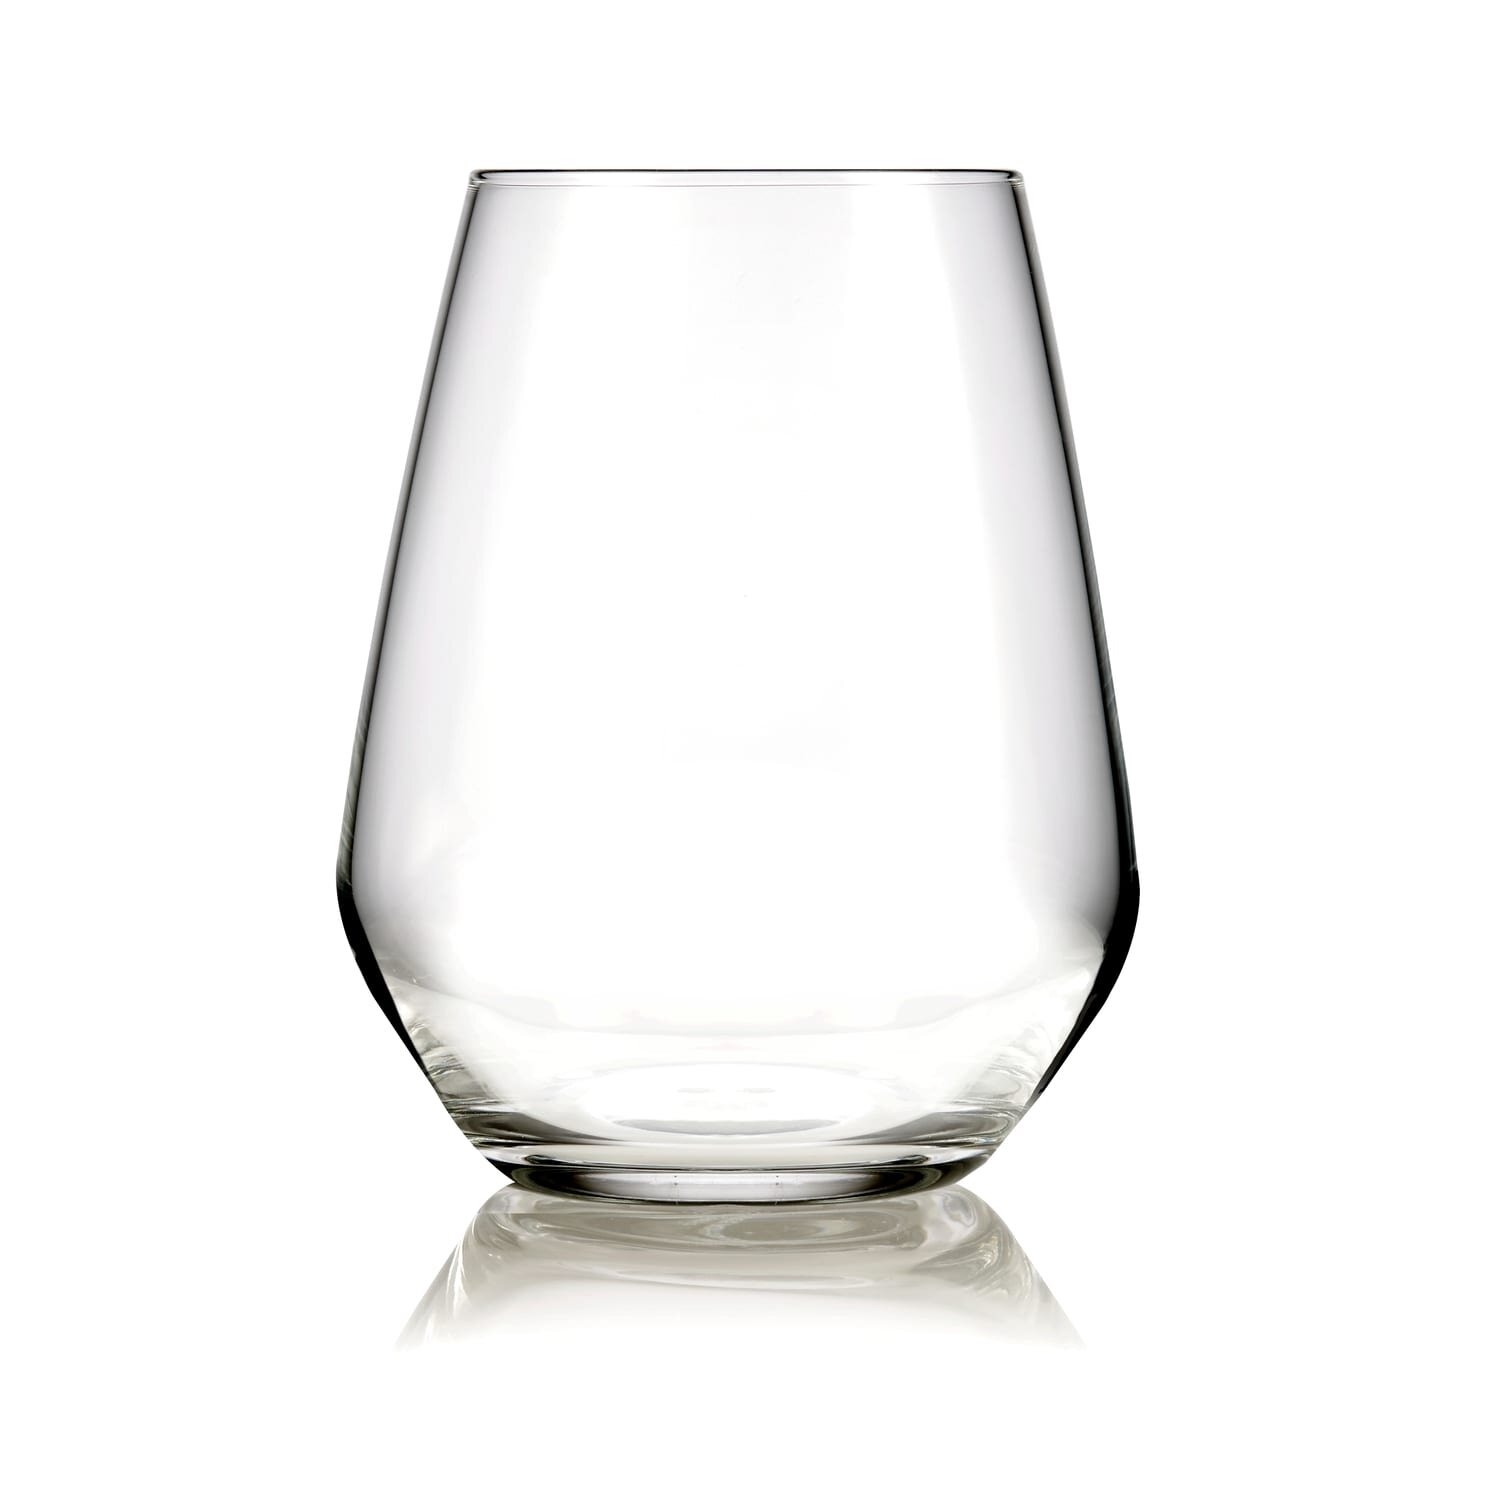 Libbey Hammered Stemless All-Purpose Wine Glasses, 17-ounce, Set